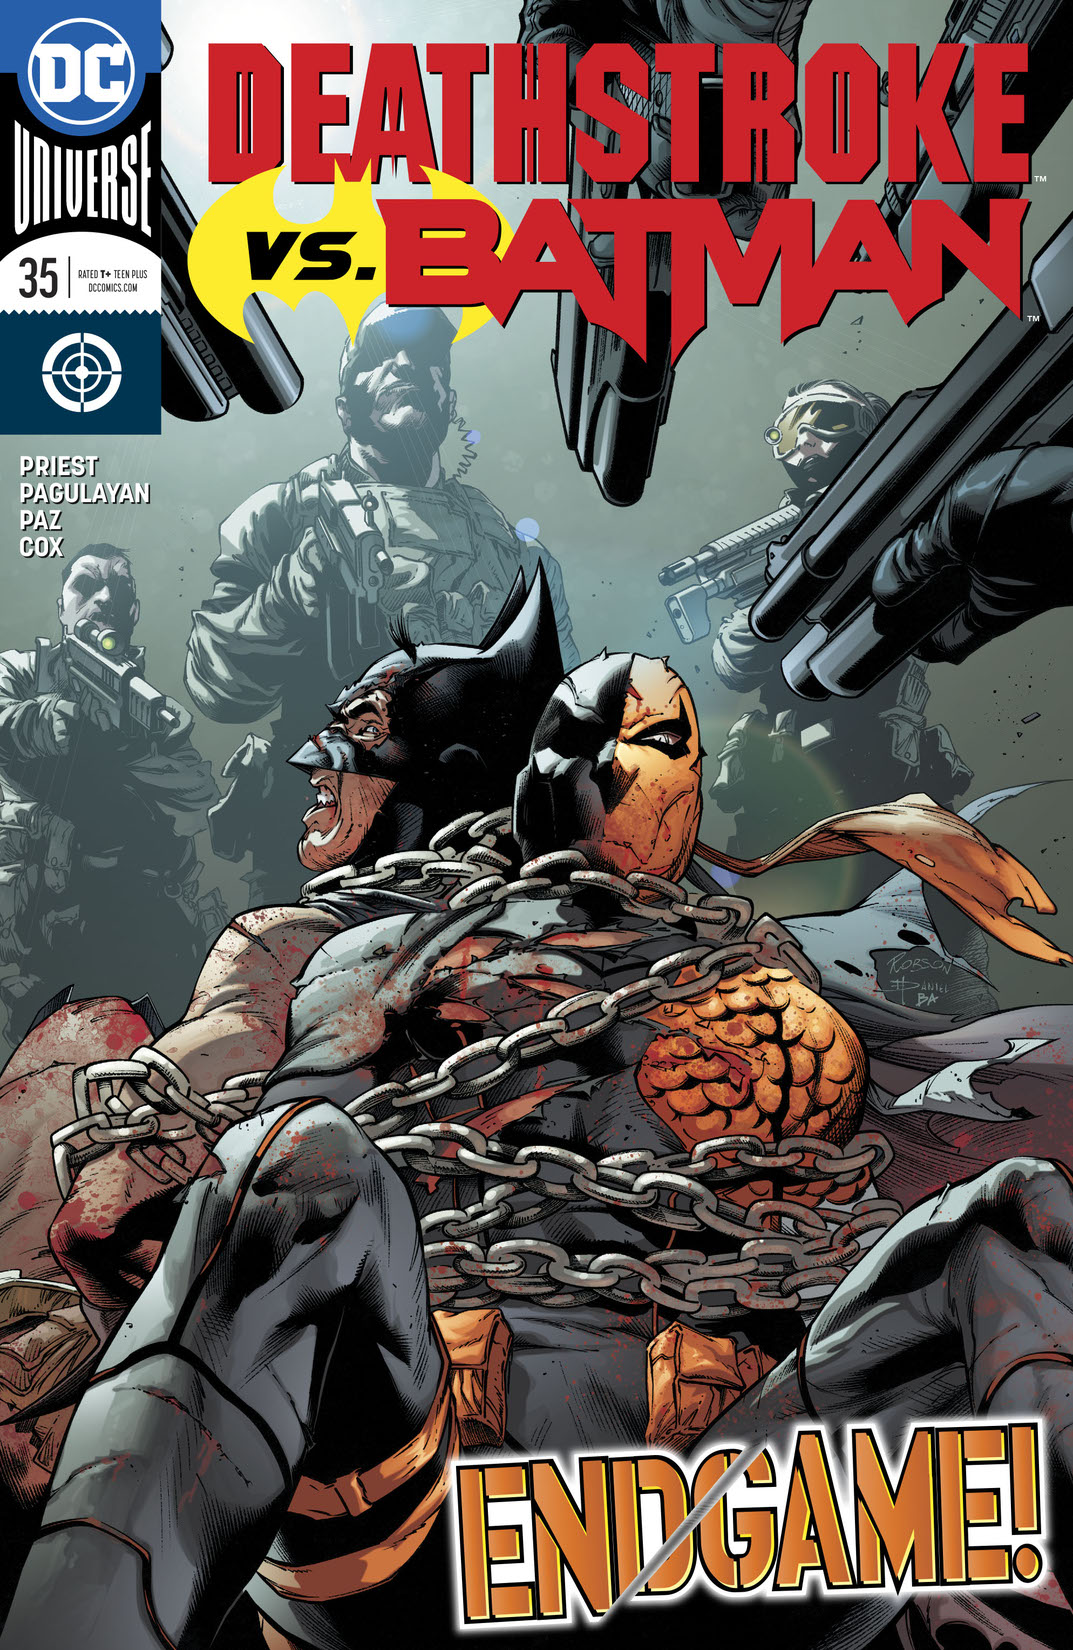 Deathstroke (2016-) #35 preview images